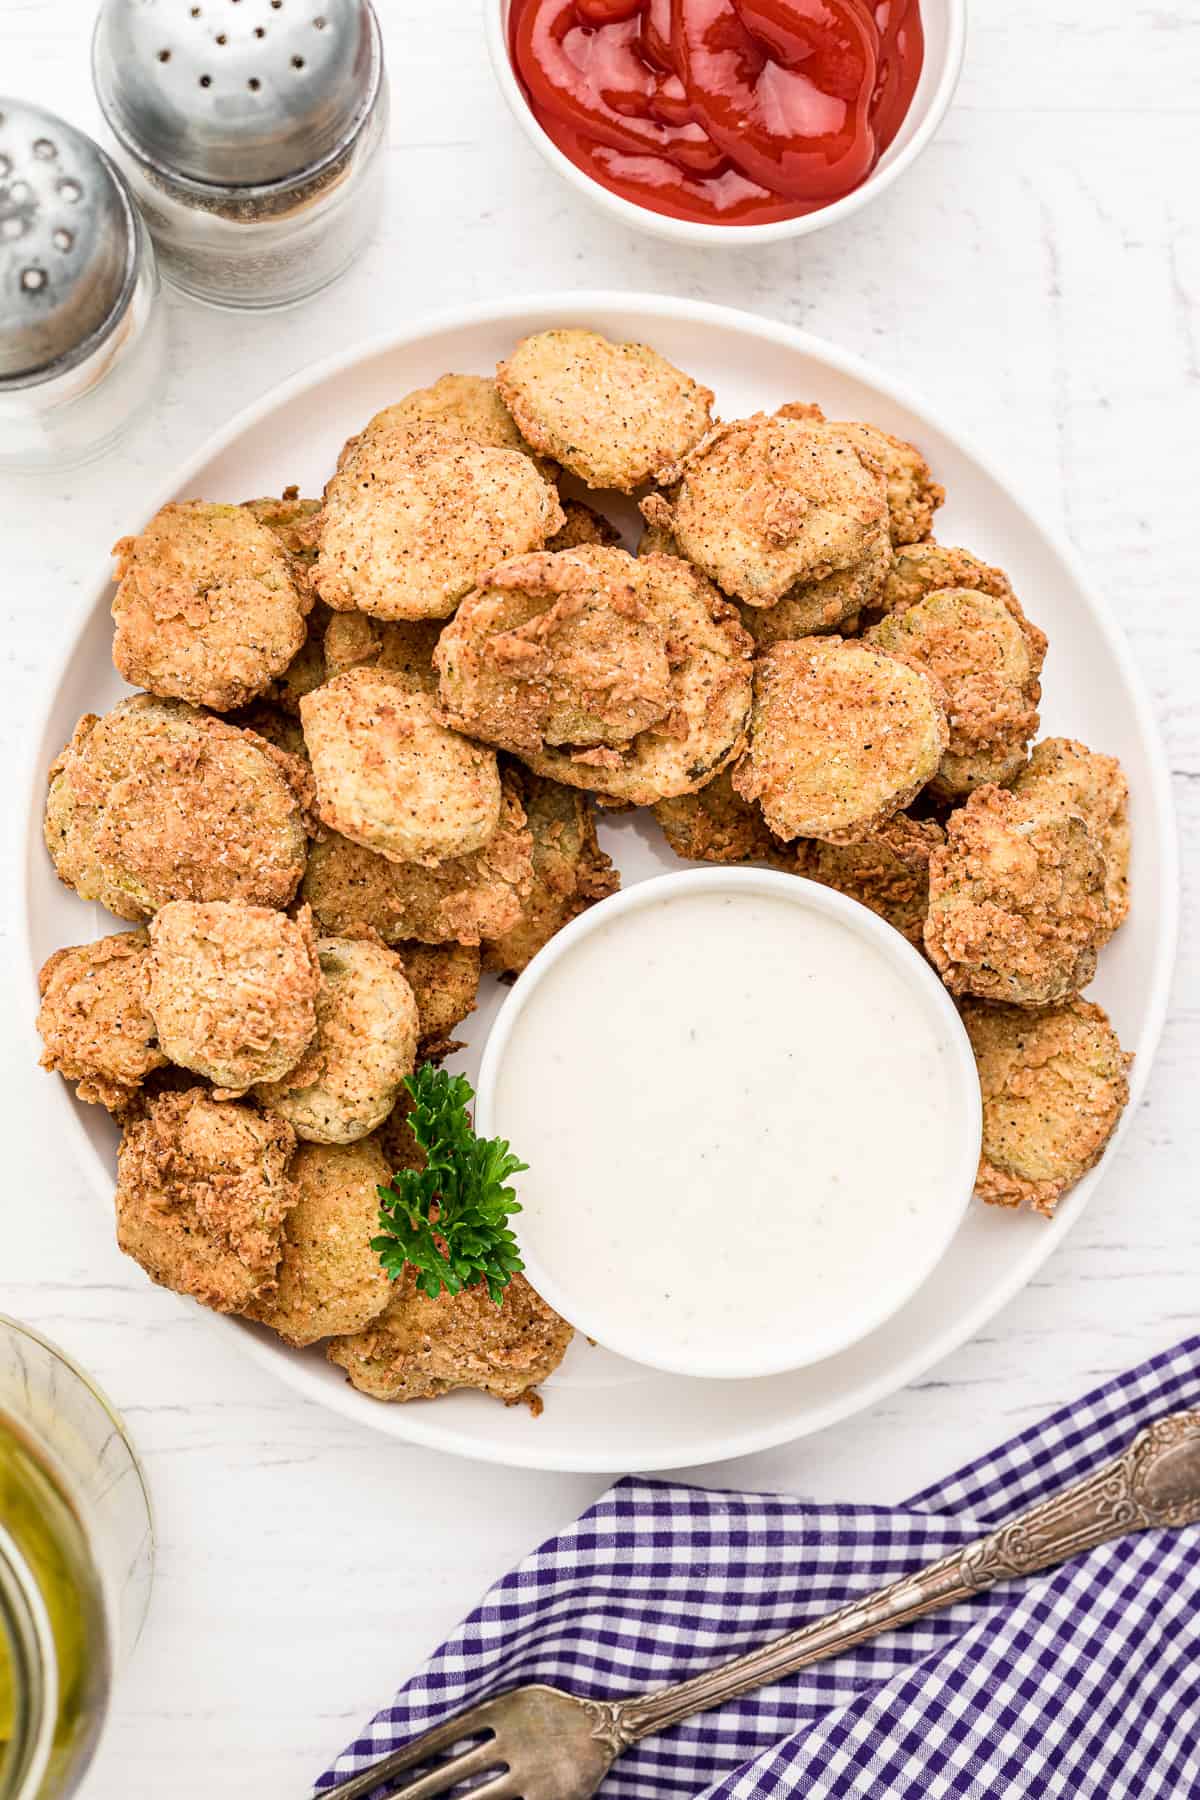 A plate of fried pickles with a bowl of ranch dipping sauce.